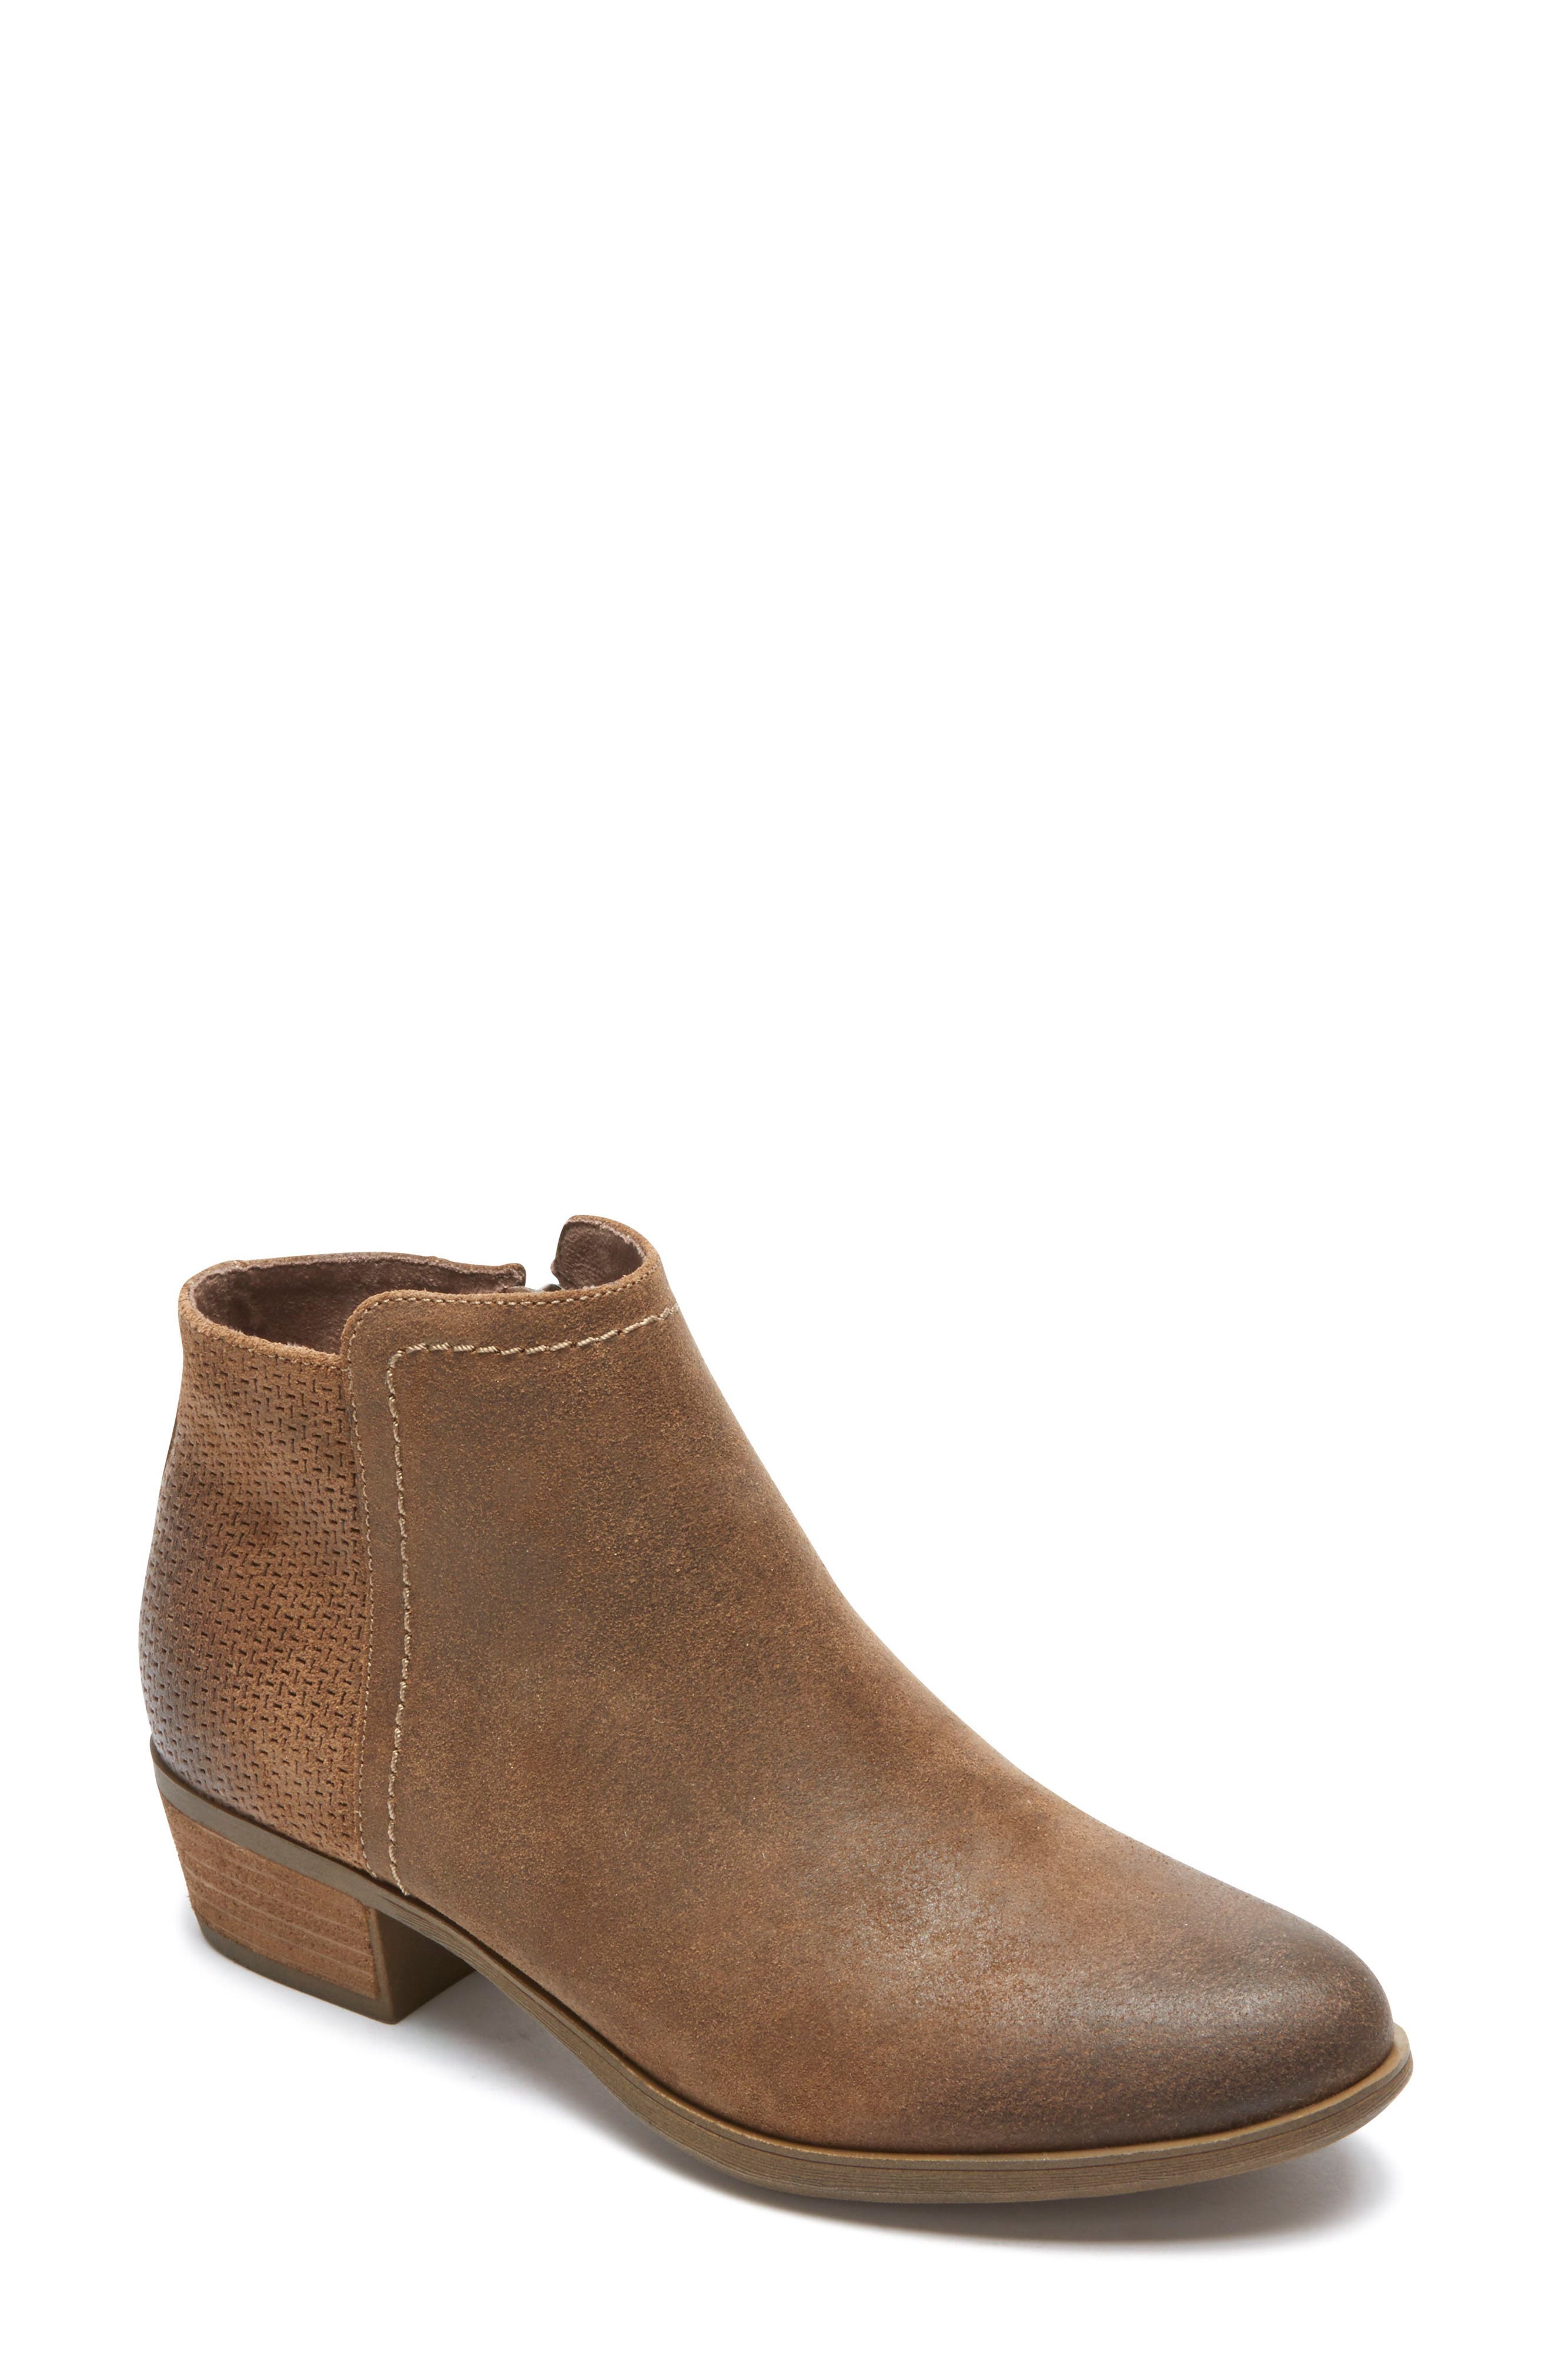 rockport vanna strappy ankle booties